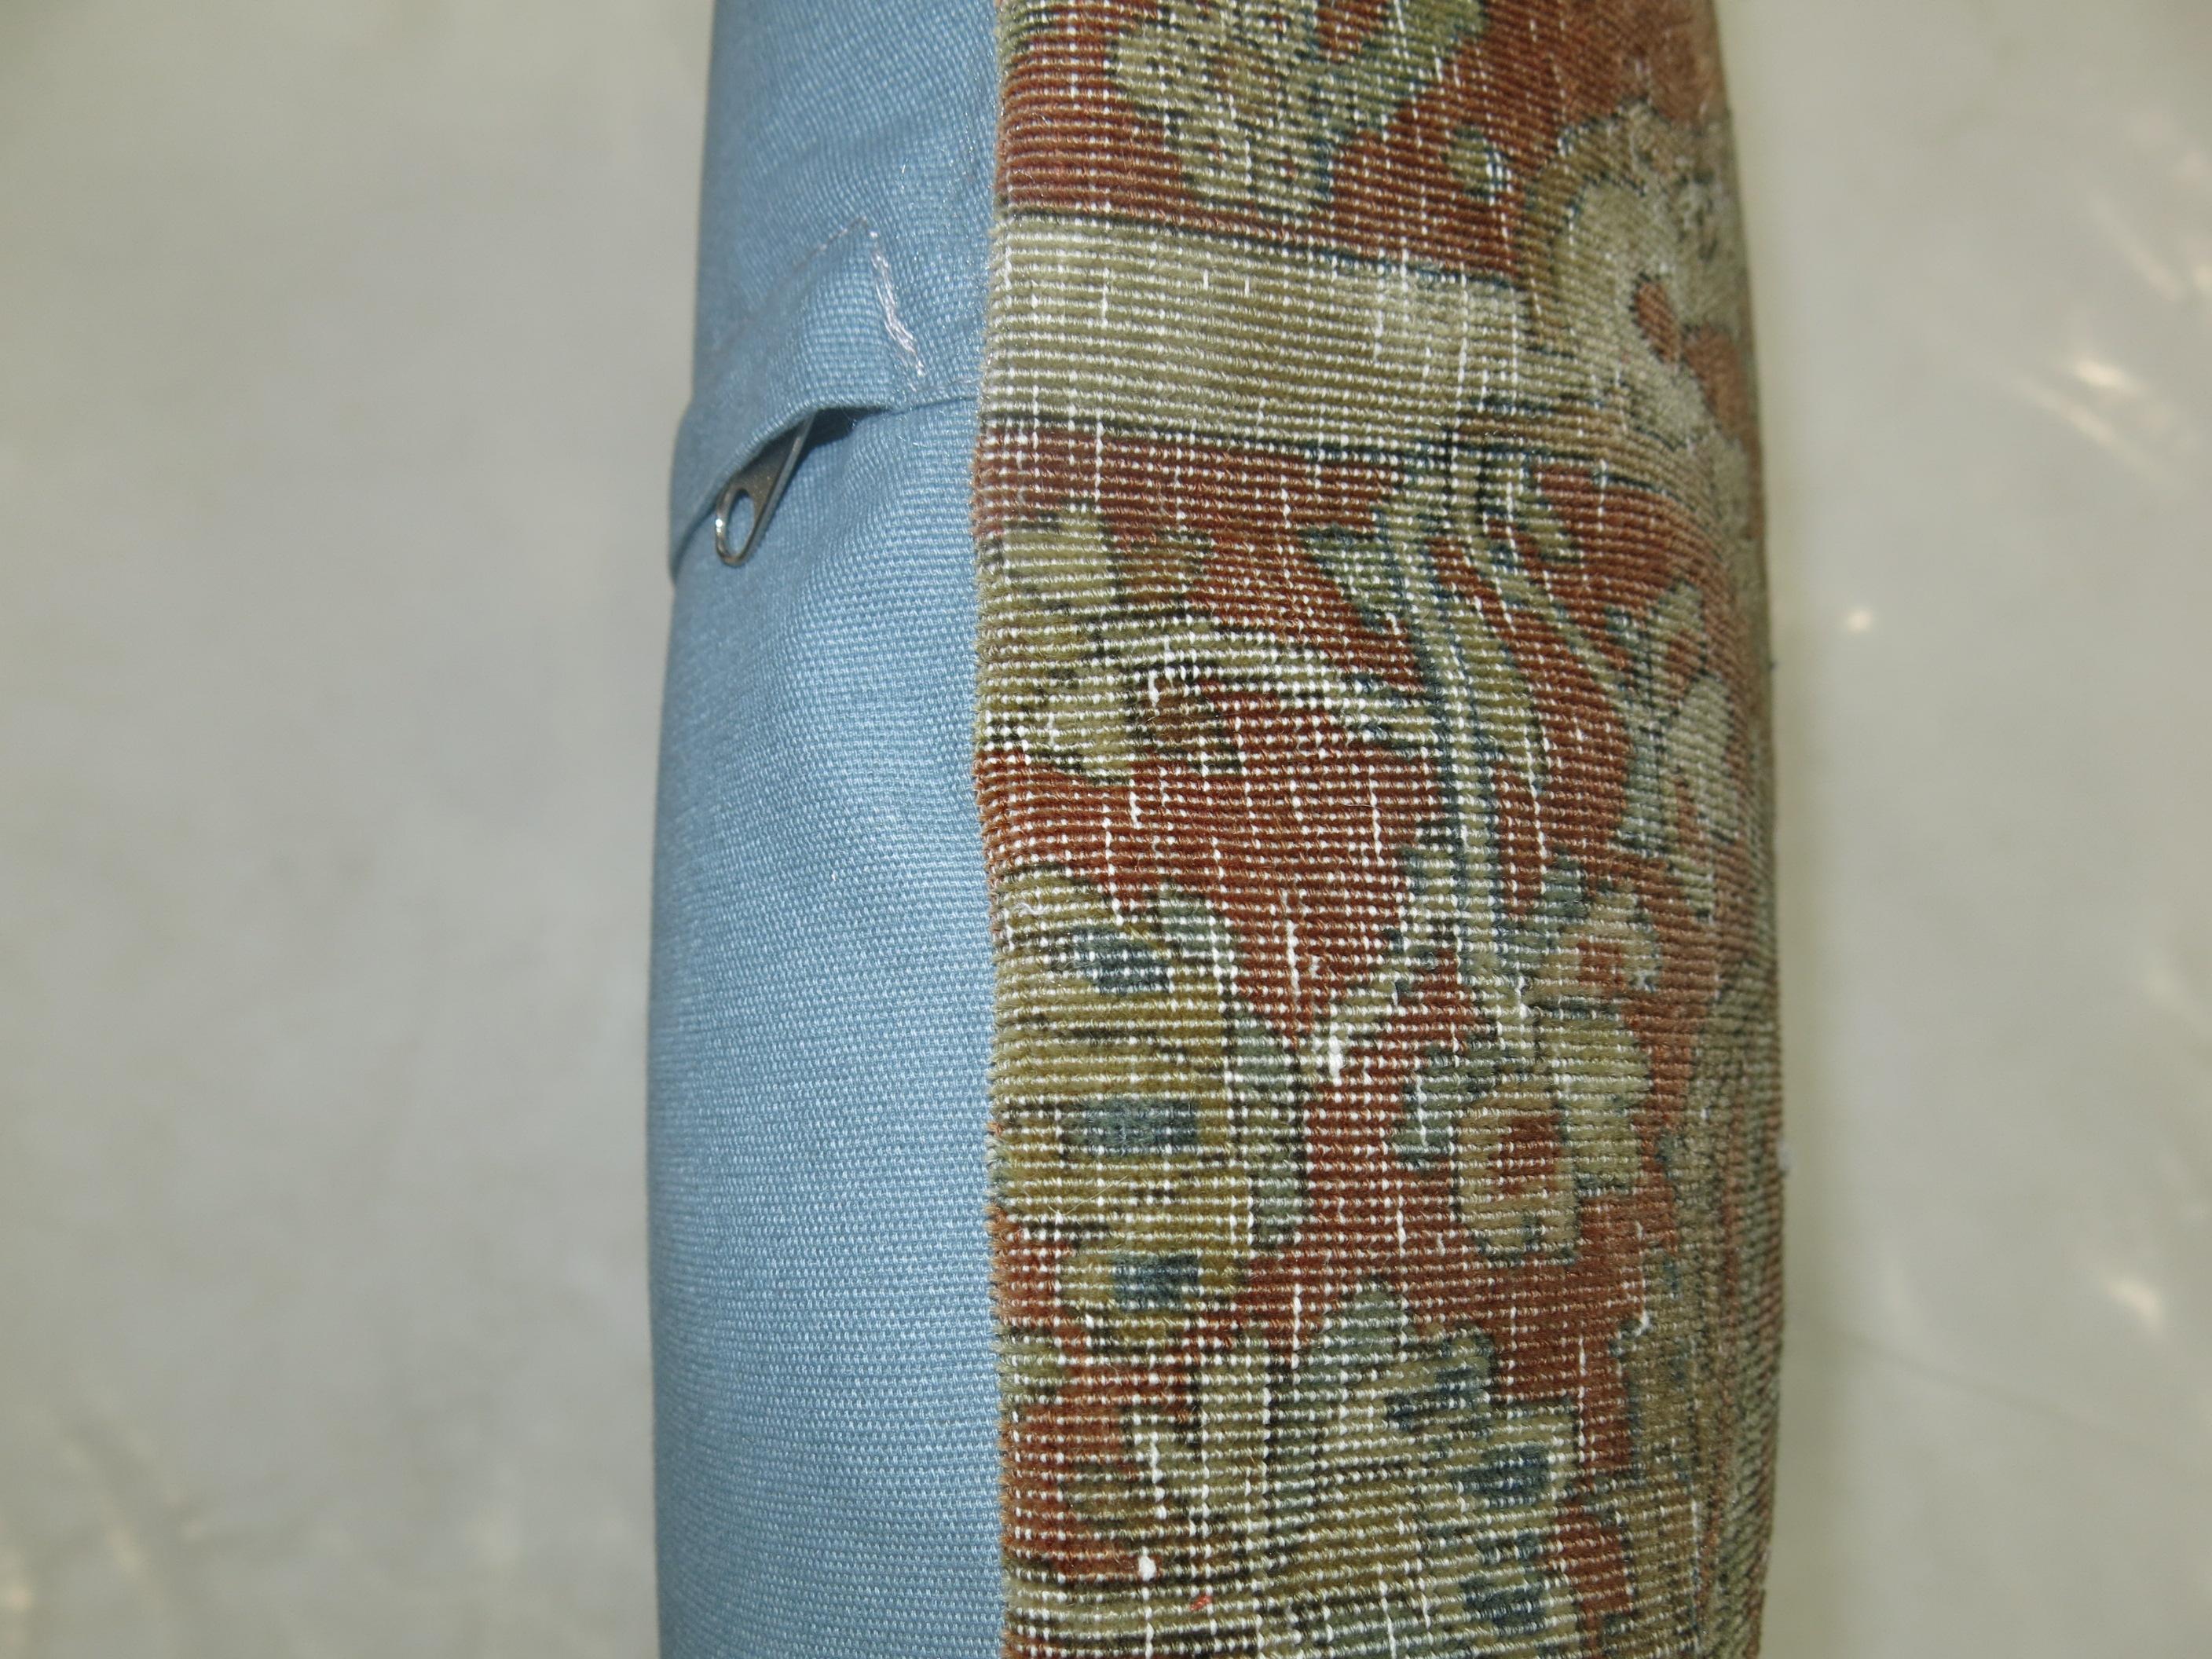 Pillow made from a shabby chic antique Persian rug with a formal palette in blue and green accents.

Measures: 19” x 20”.